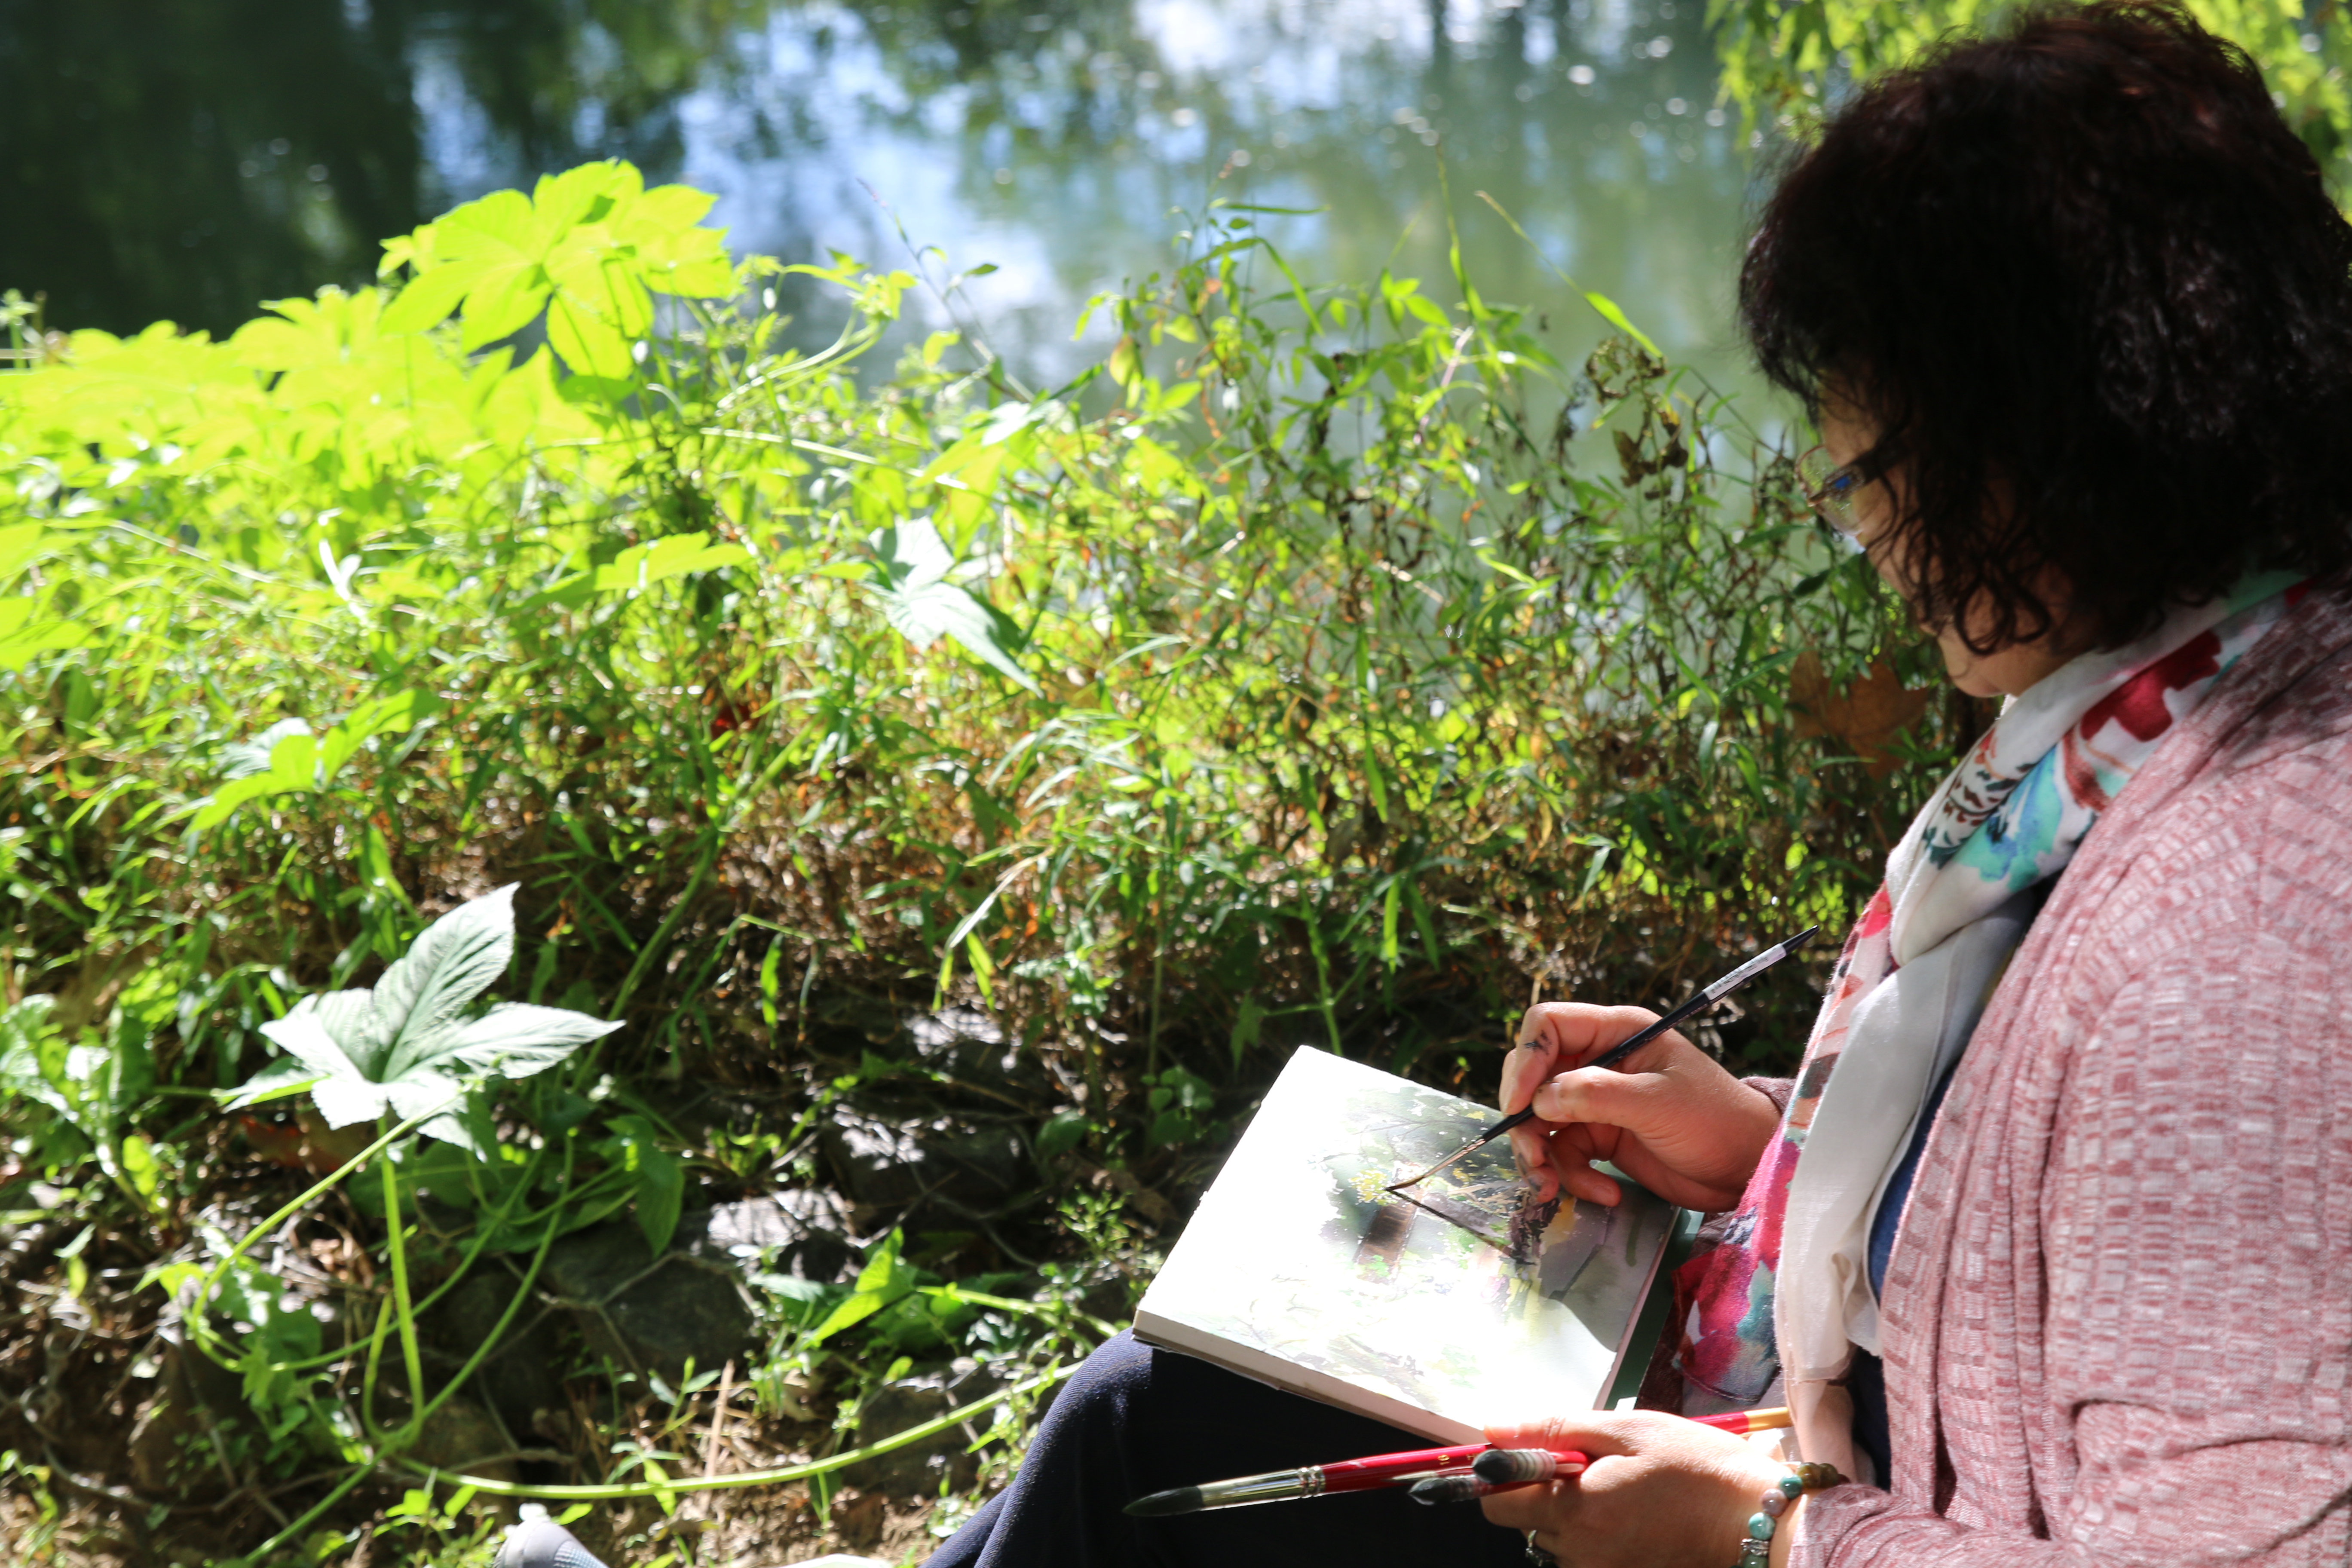 A woman sits and sketches in a notebook on a summer day.